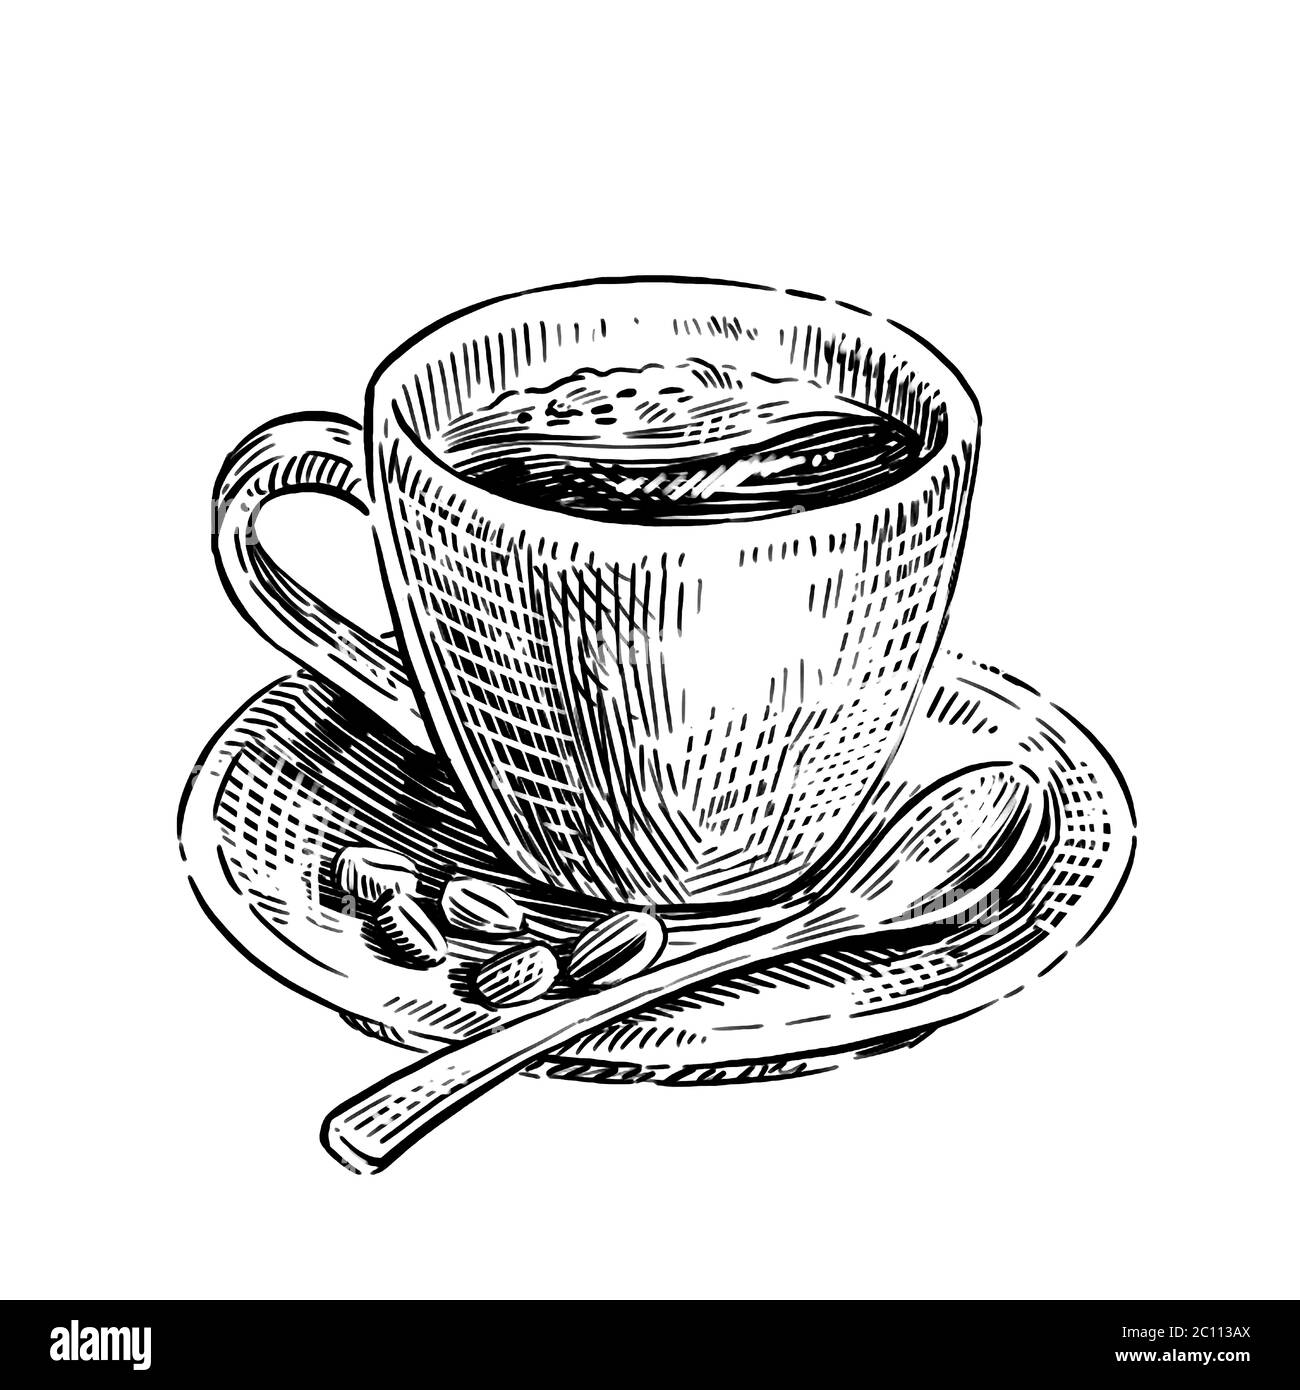 Hand-drawn sketch cup of coffee isolated on white background Stock Photo